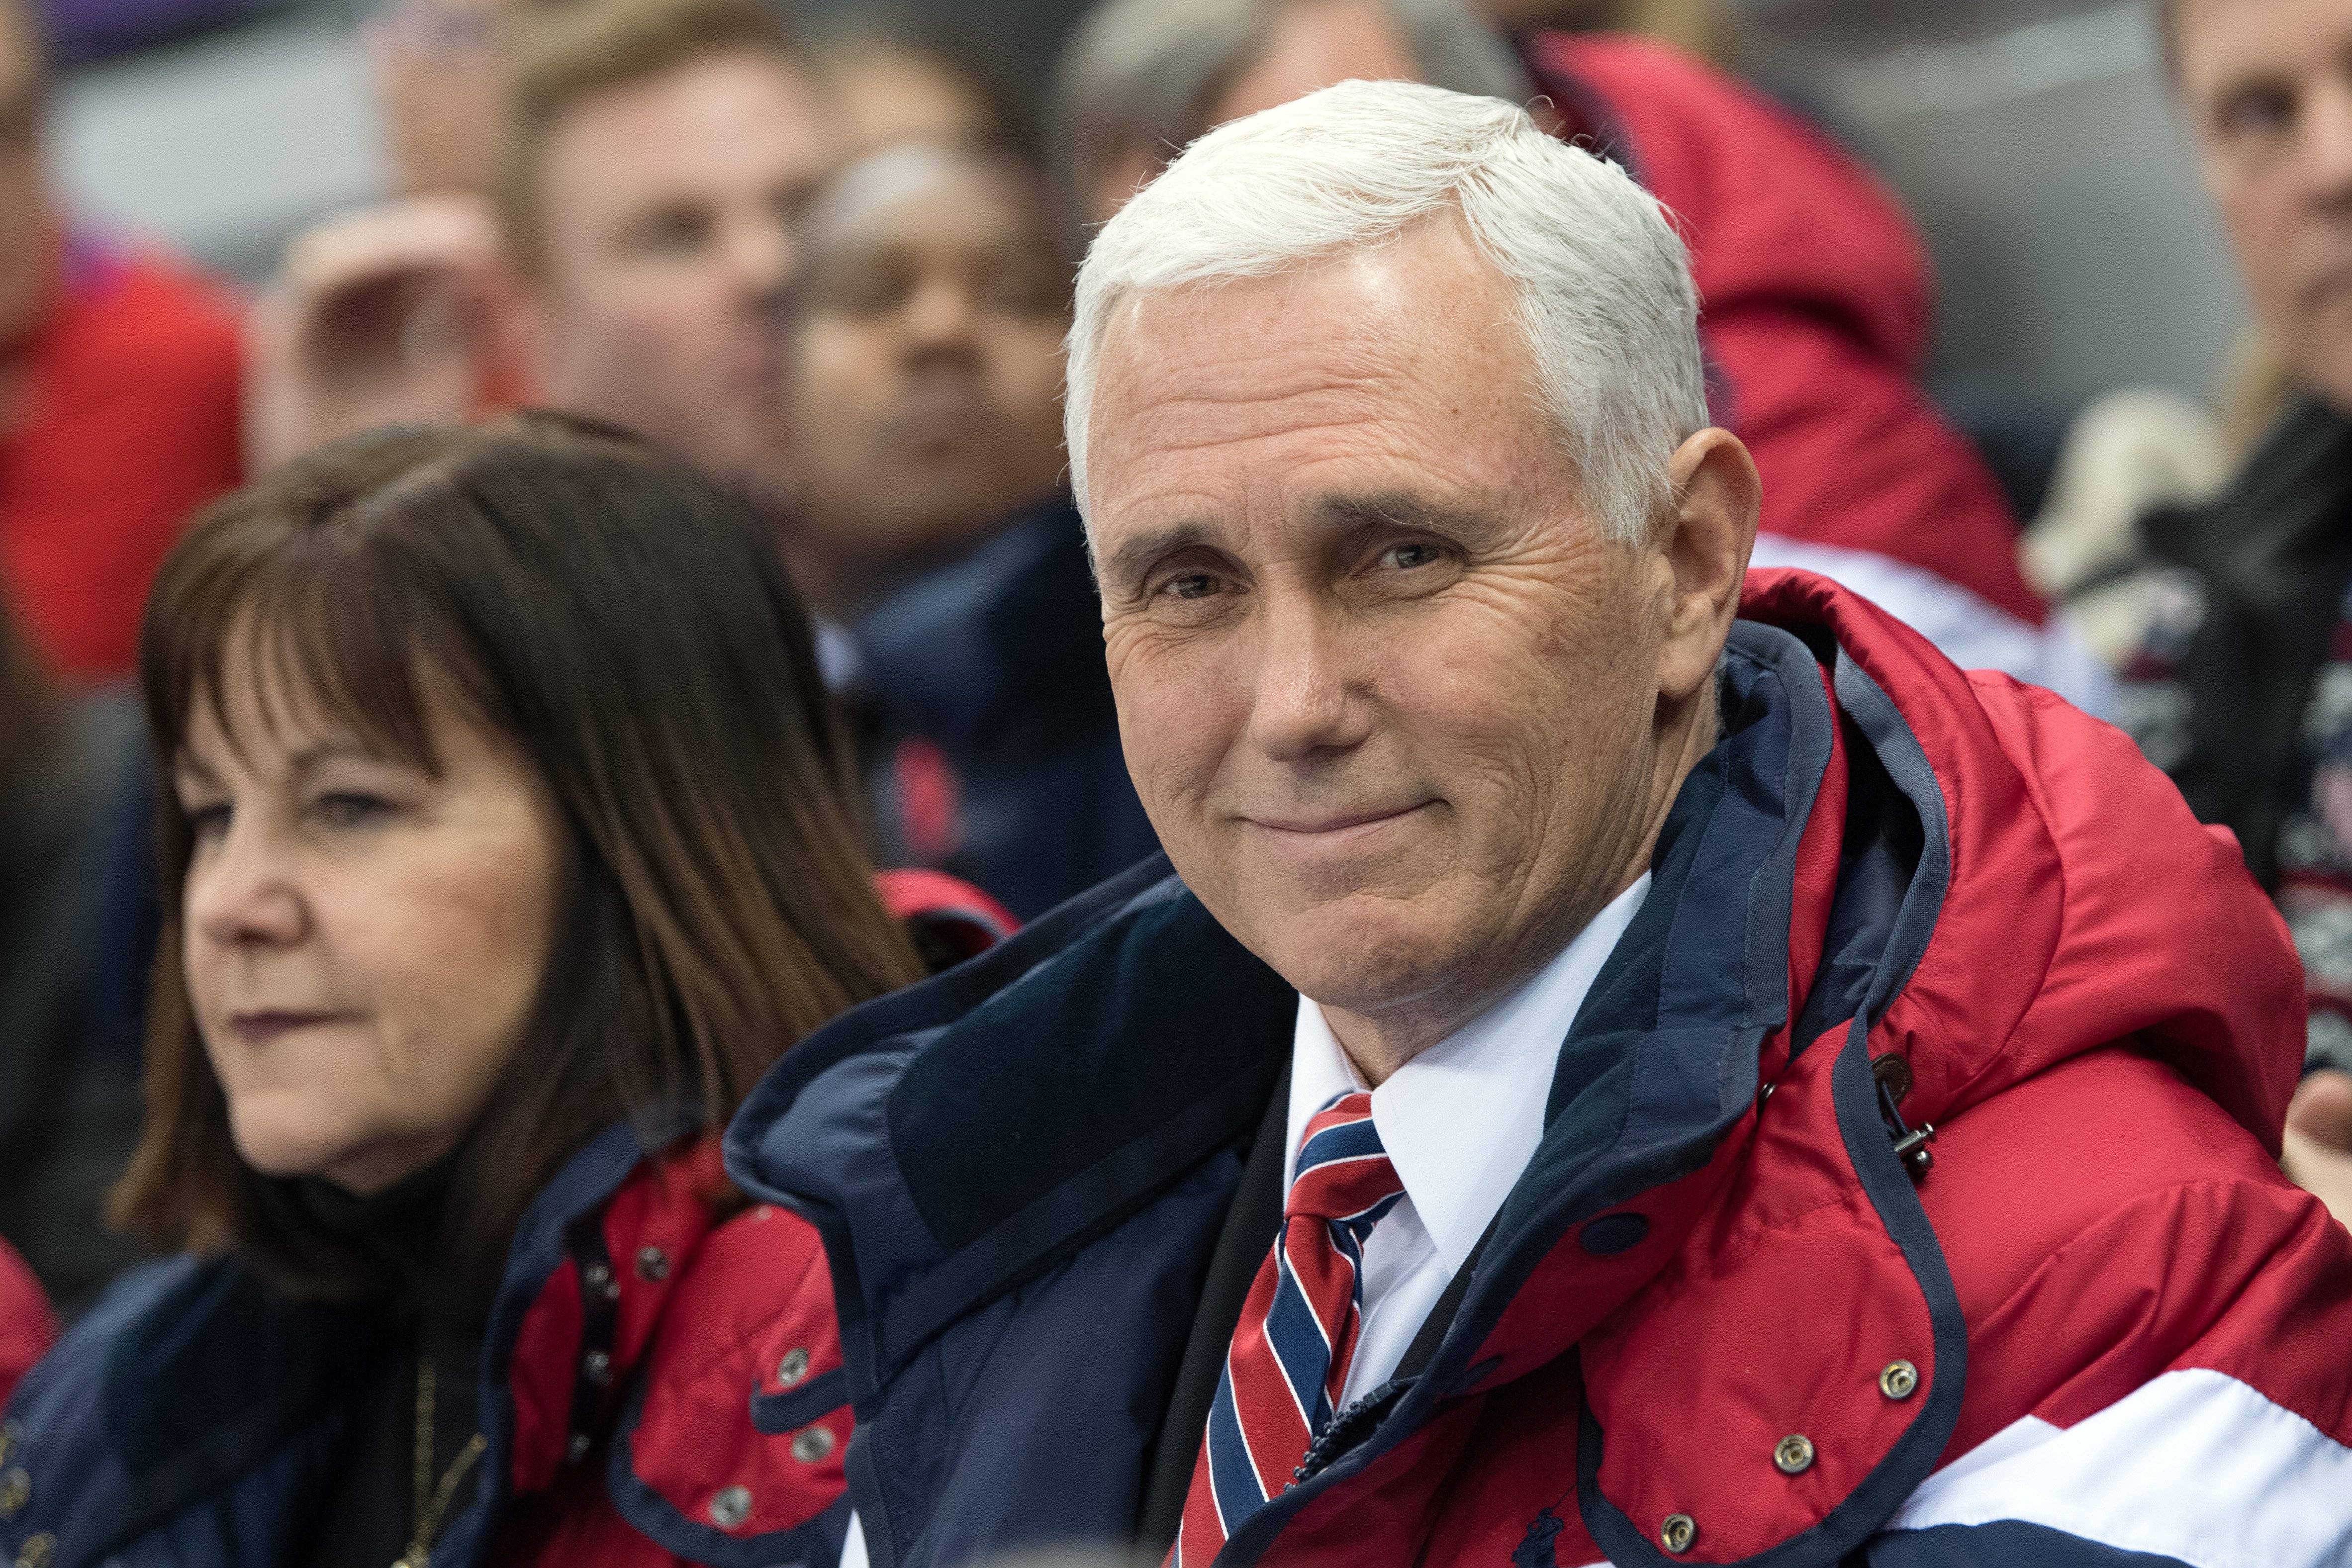 GANGNEUNG, SOUTH KOREA - FEBRUARY 10: United States Vice President Mike Pence and his wife Karen watch short track speed skating at Gangneung Ice Arena on February 10, 2018 in Gangneung, South Korea. Mr Pence is on the final day of a three day visit to South Korea where he watched last night's opening ceremony in close proximity to North Korea's ceremonial head of state Kim Yong-nam and Kim Jong-un's sister, Kim Yo-jong. (Photo by Carl Court/Getty Images)